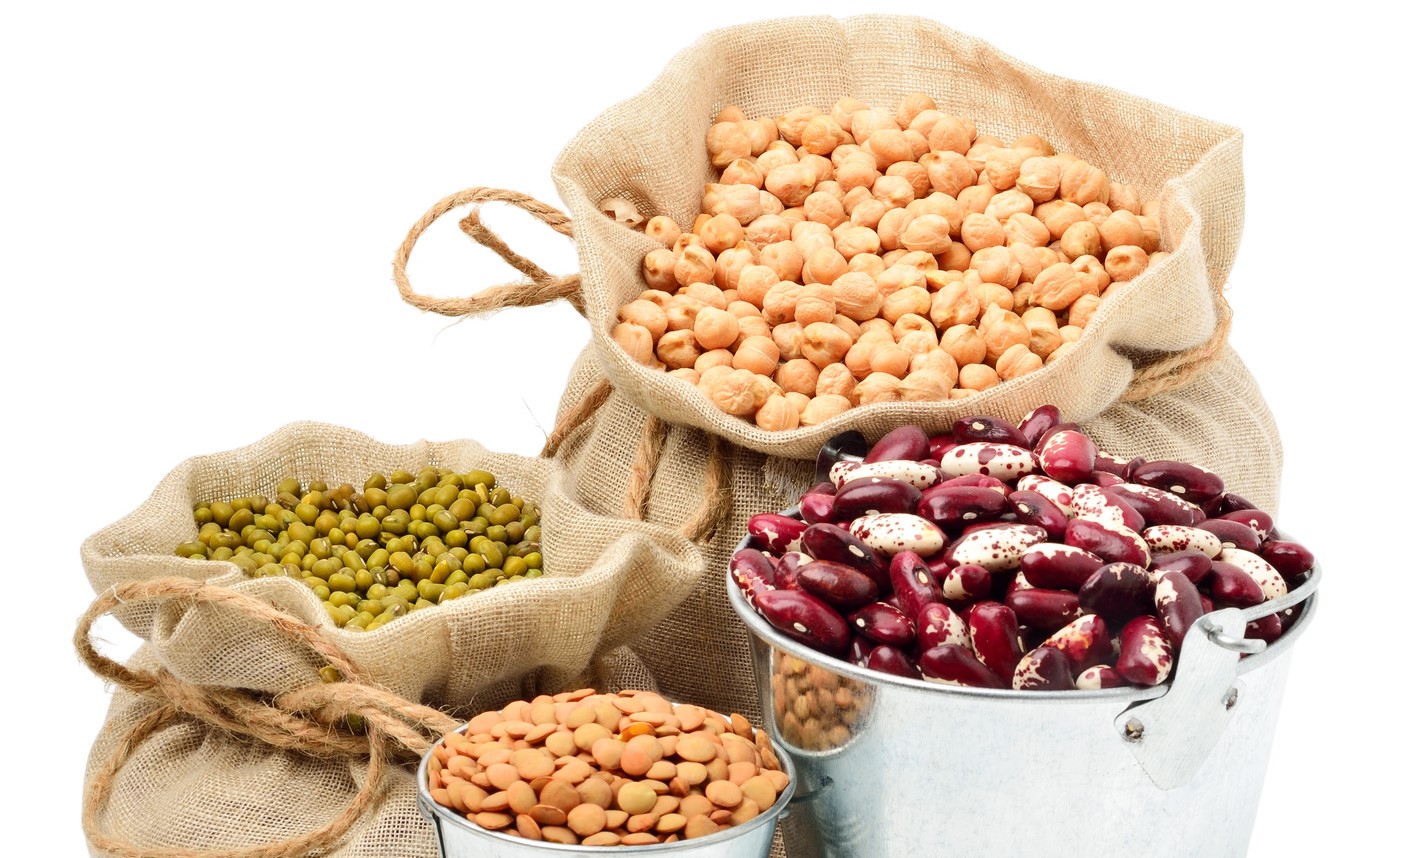 chick-pea, mung beans, kidney-beans in the sacks isolated on white